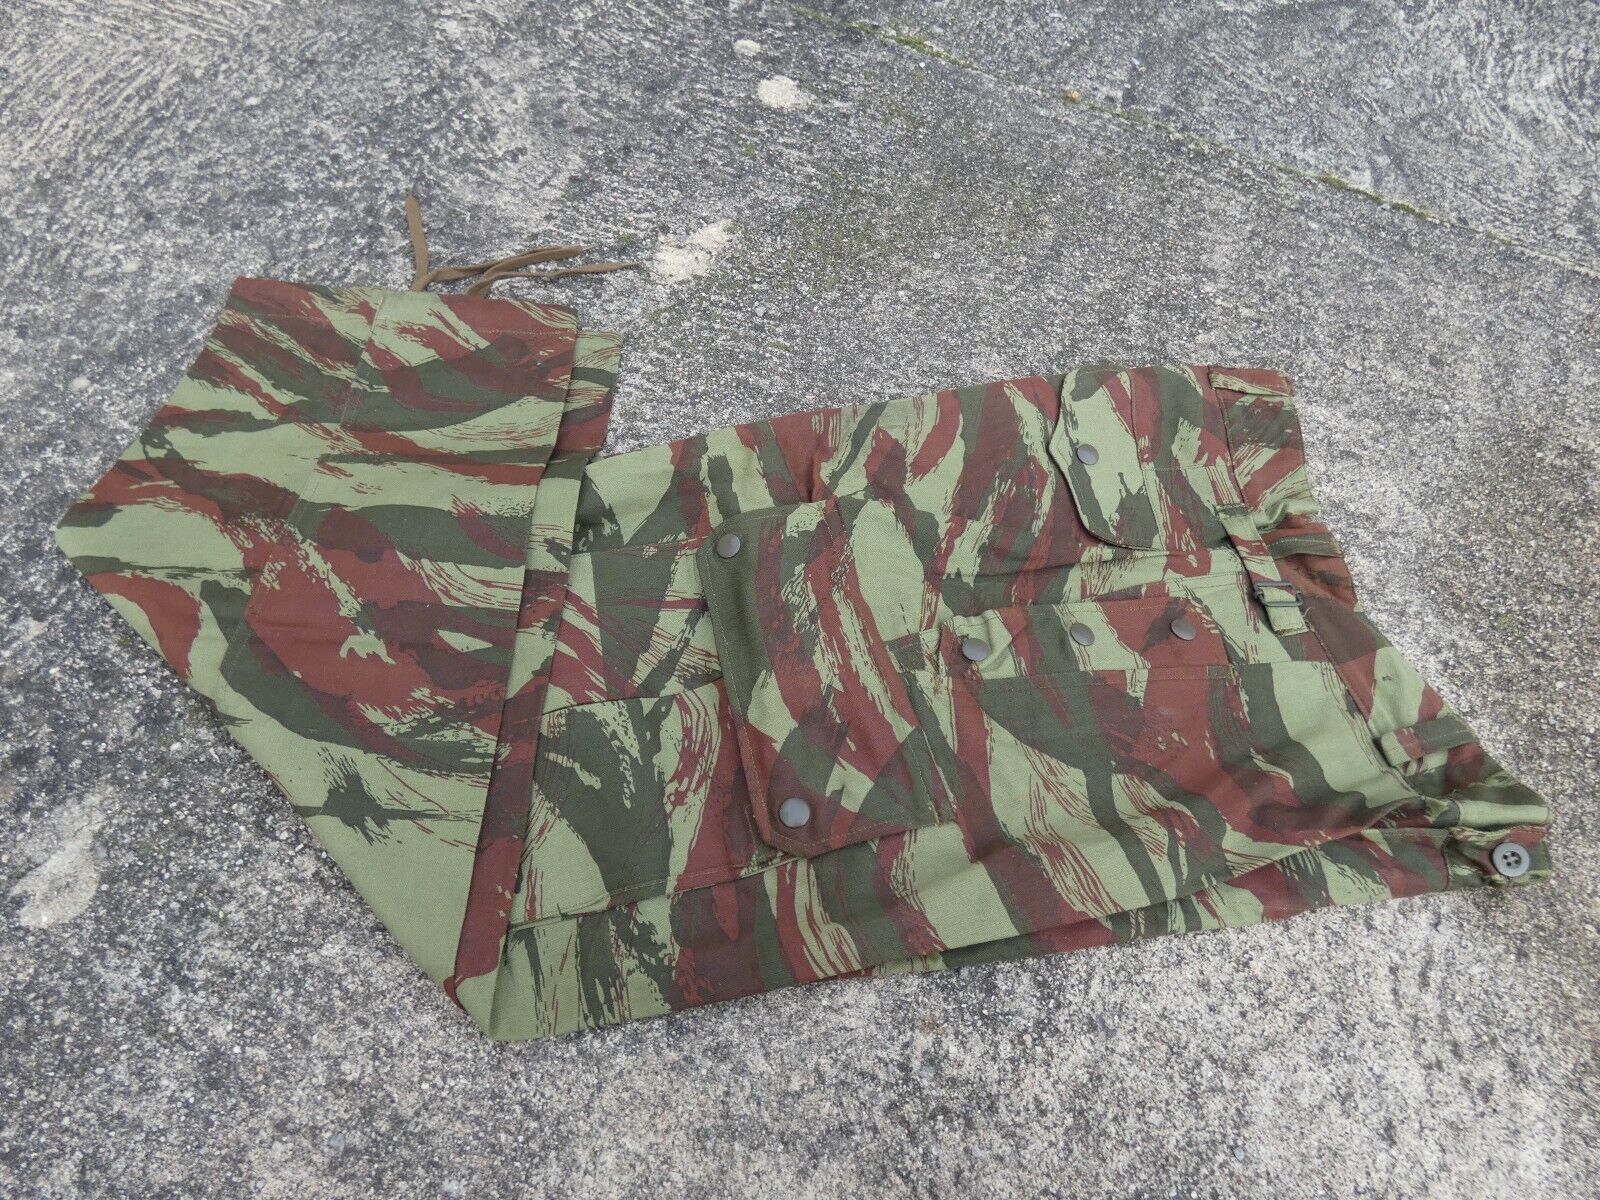 Original French Paratrooper Lizard Camouflage Camo Pants Trousers Size 11